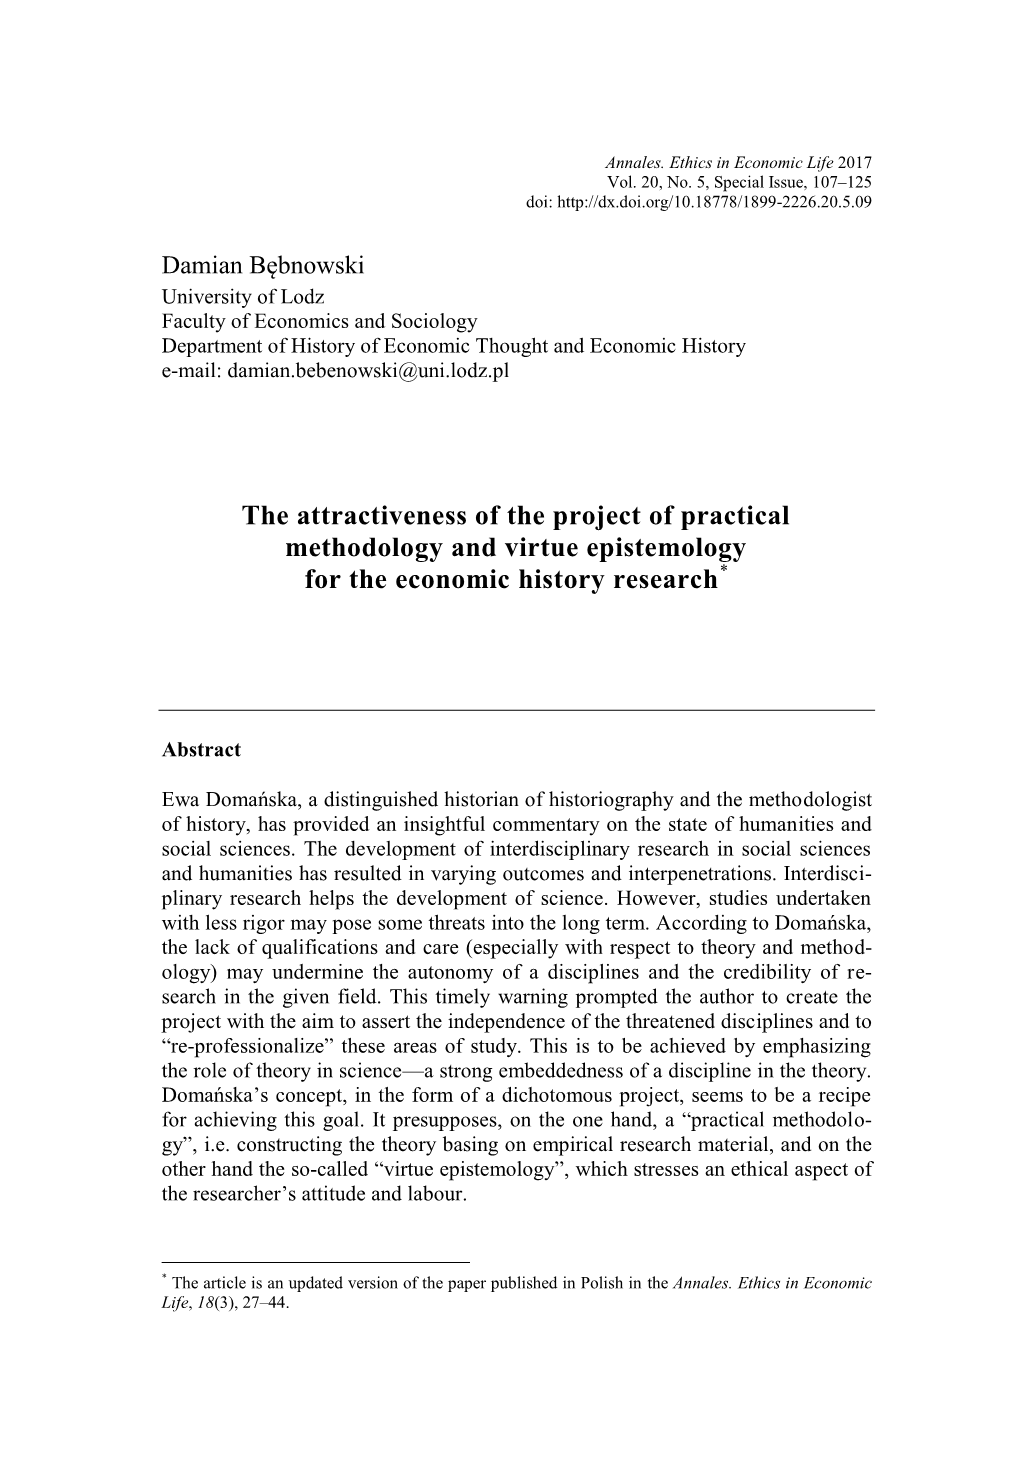 The Attractiveness of the Project of Practical Methodology and Virtue Epistemology for the Economic History Research*